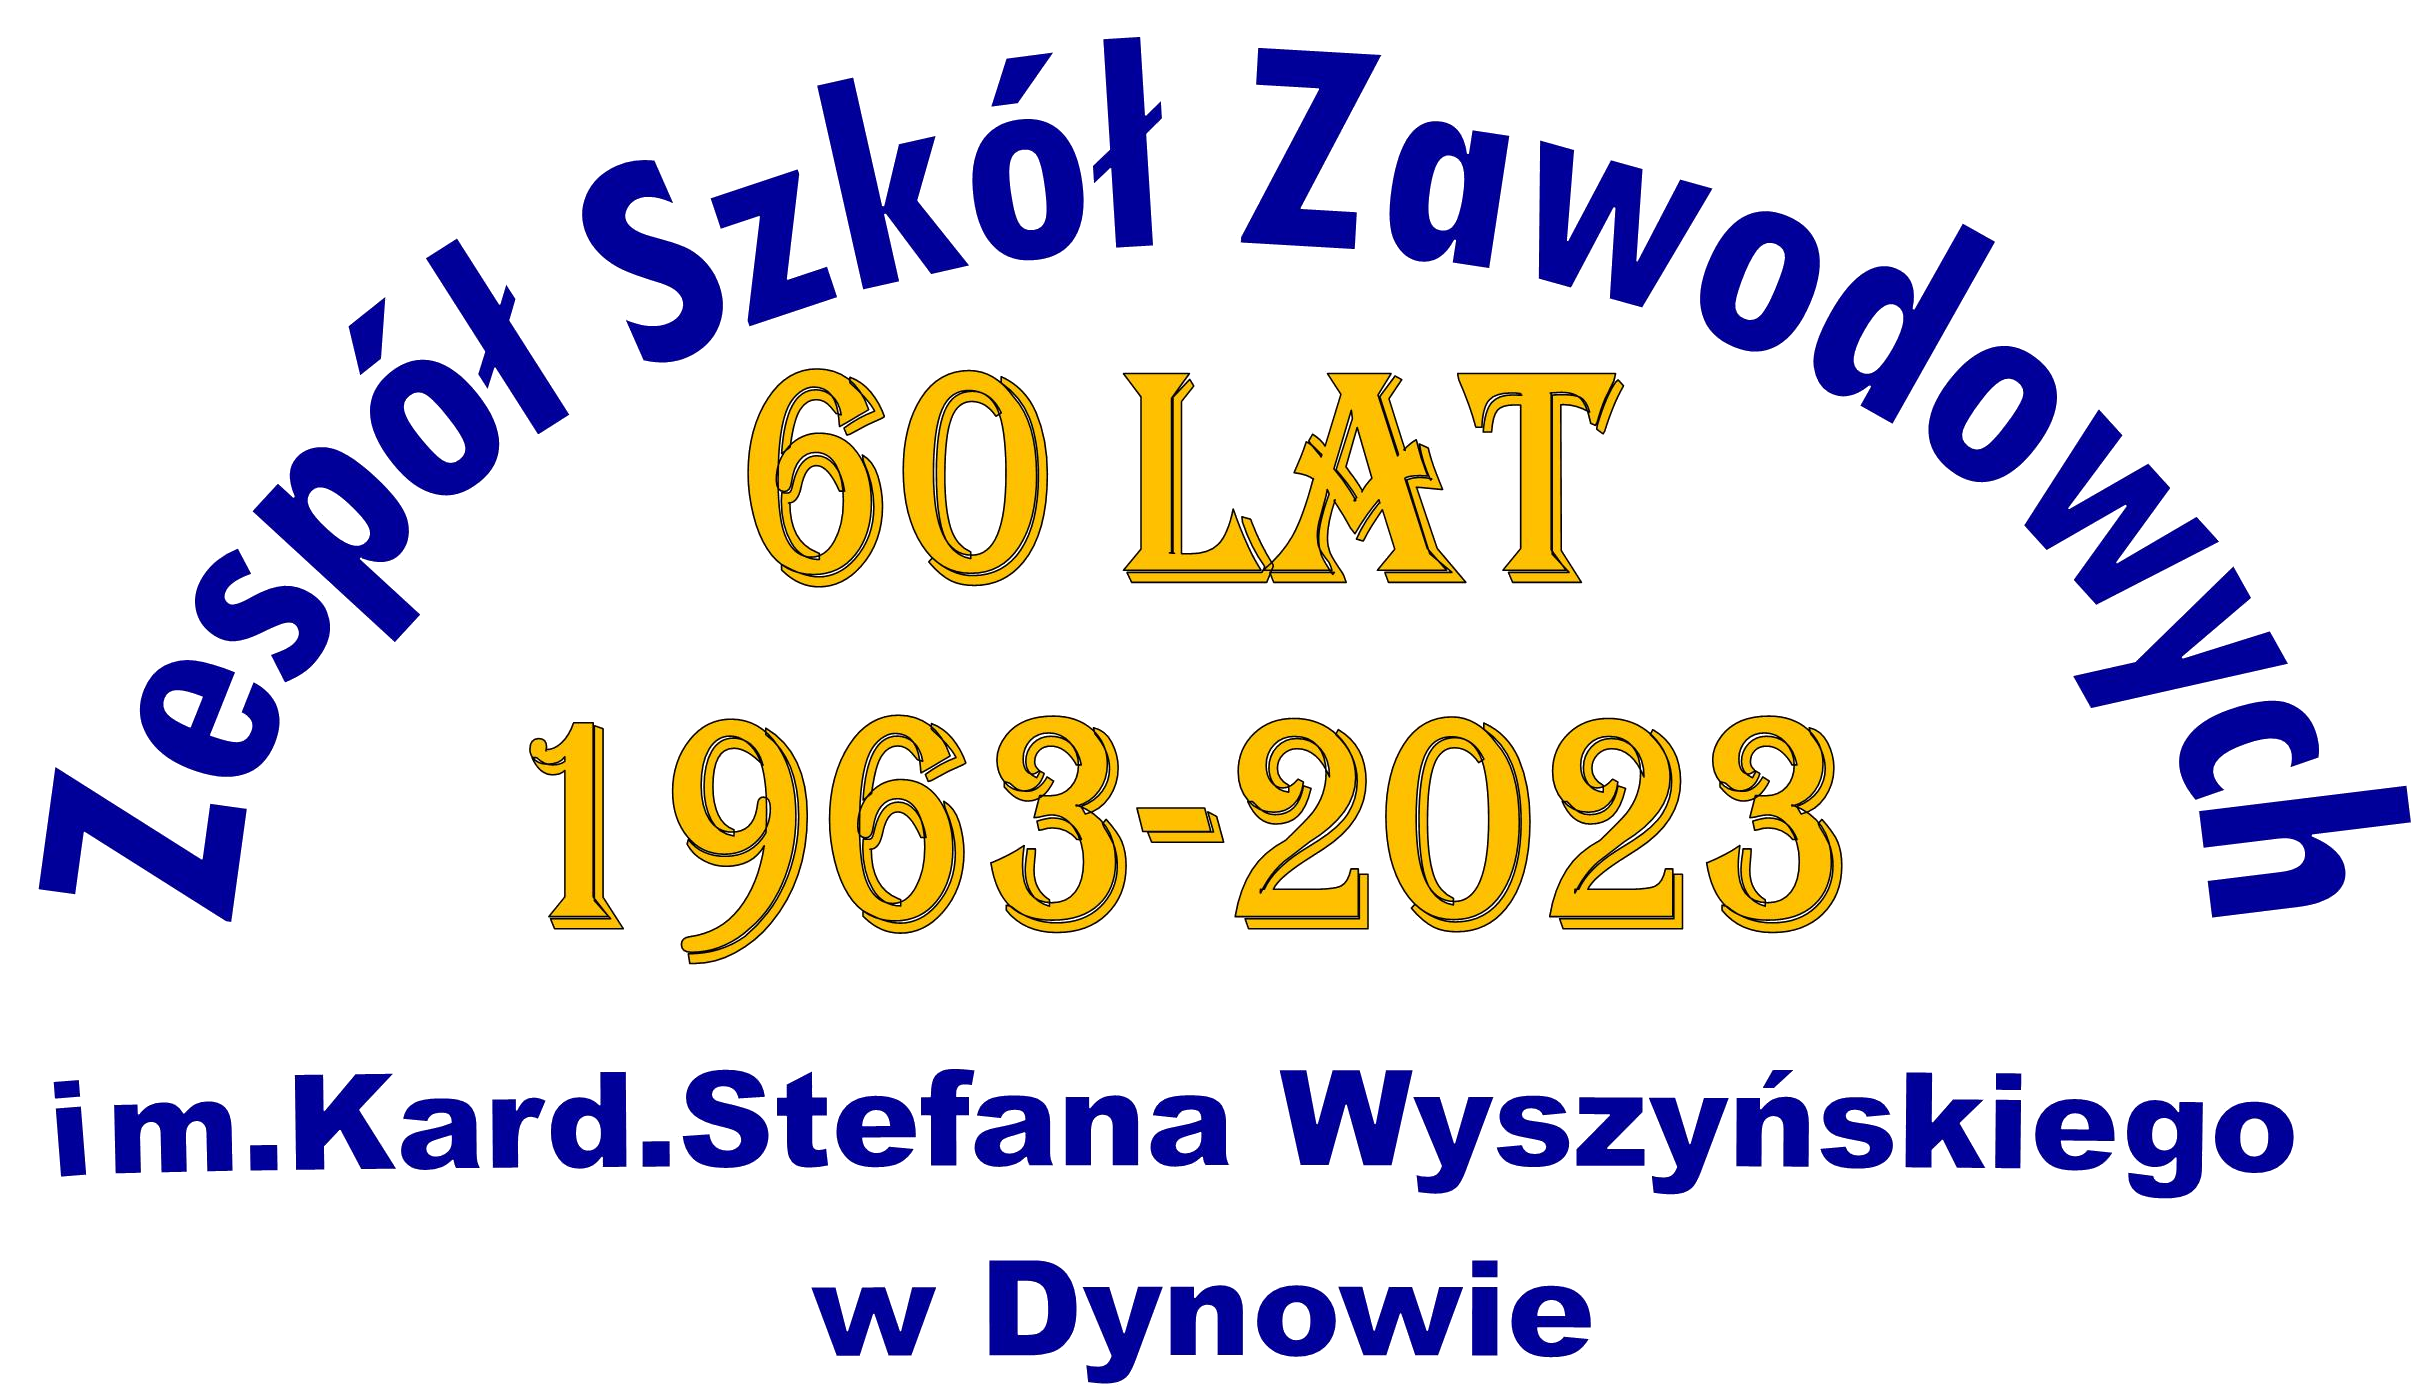 Opis: C:\Users\s\Desktop\A_STRONA- ZSzZ-2023\ca\60-lecie\Logo 60-lecia.png